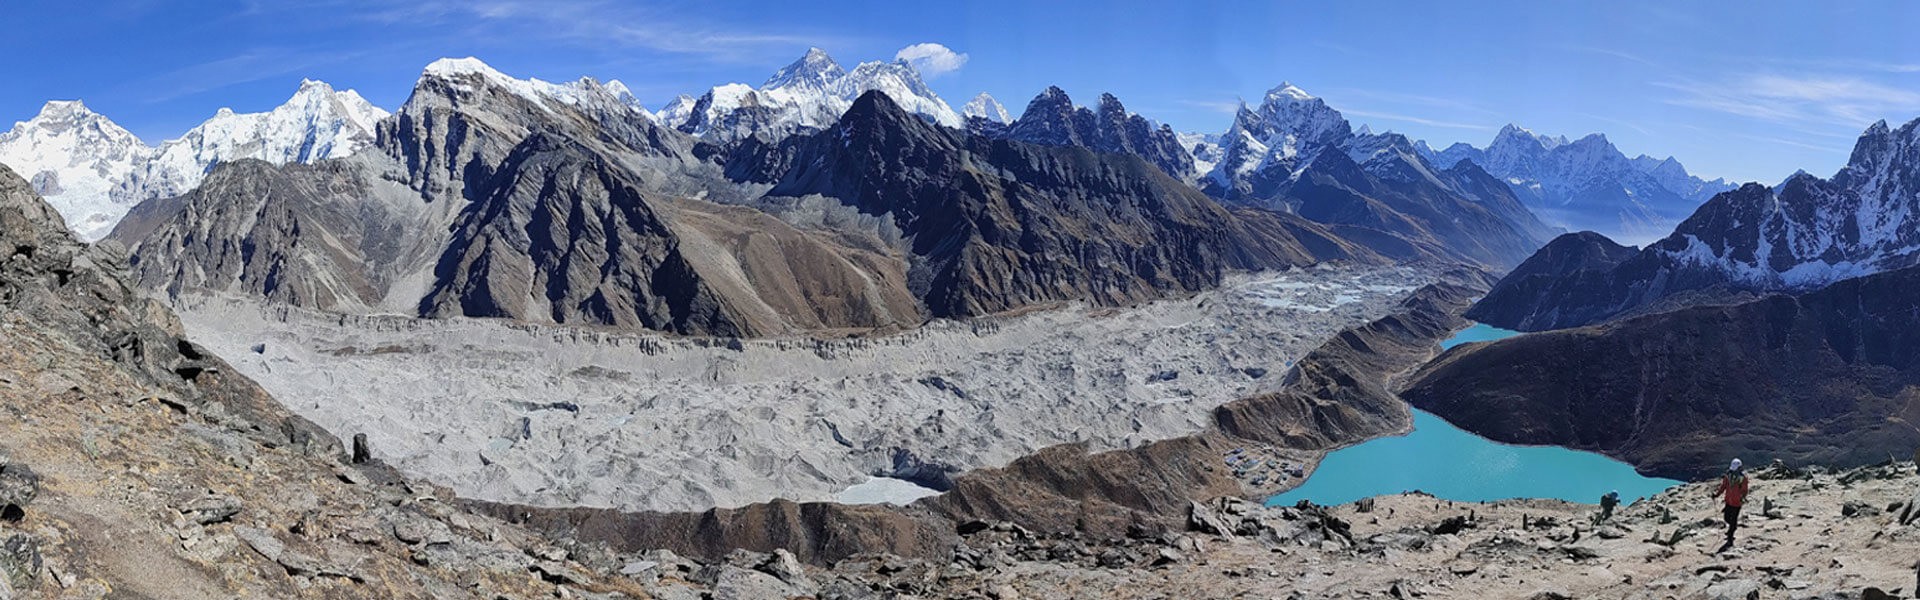 Mt. Everest View from Gokyo Ri